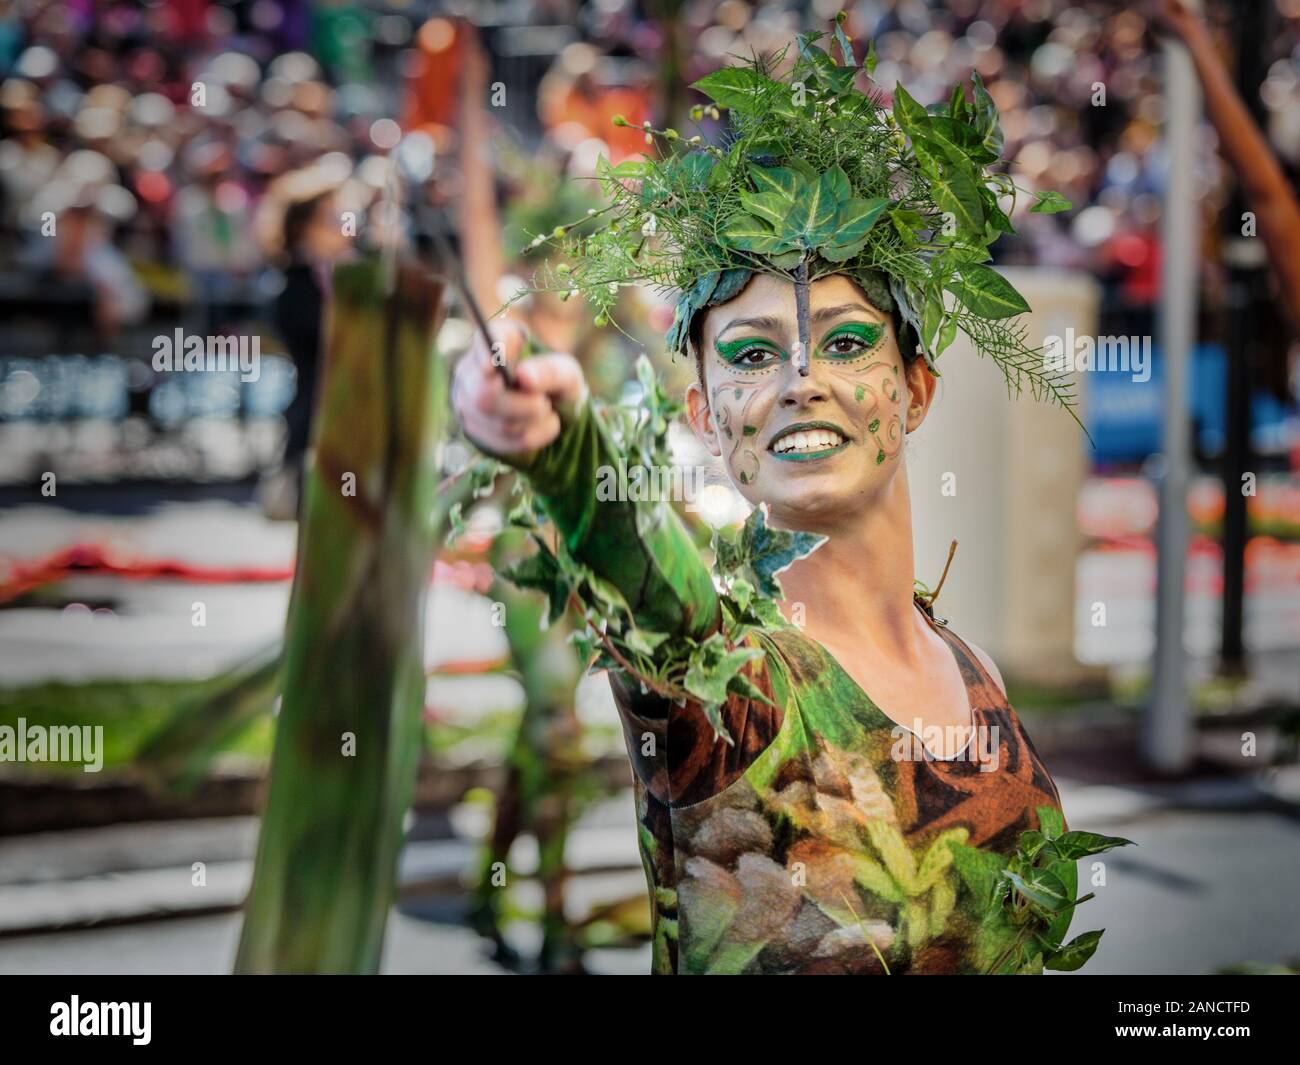 Performer in brightly coloured green costume dressed as pixie with a wand  at the Flower Parade, Nice Carnival, French Riviera, Cote d'Azur, France  Stock Photo - Alamy